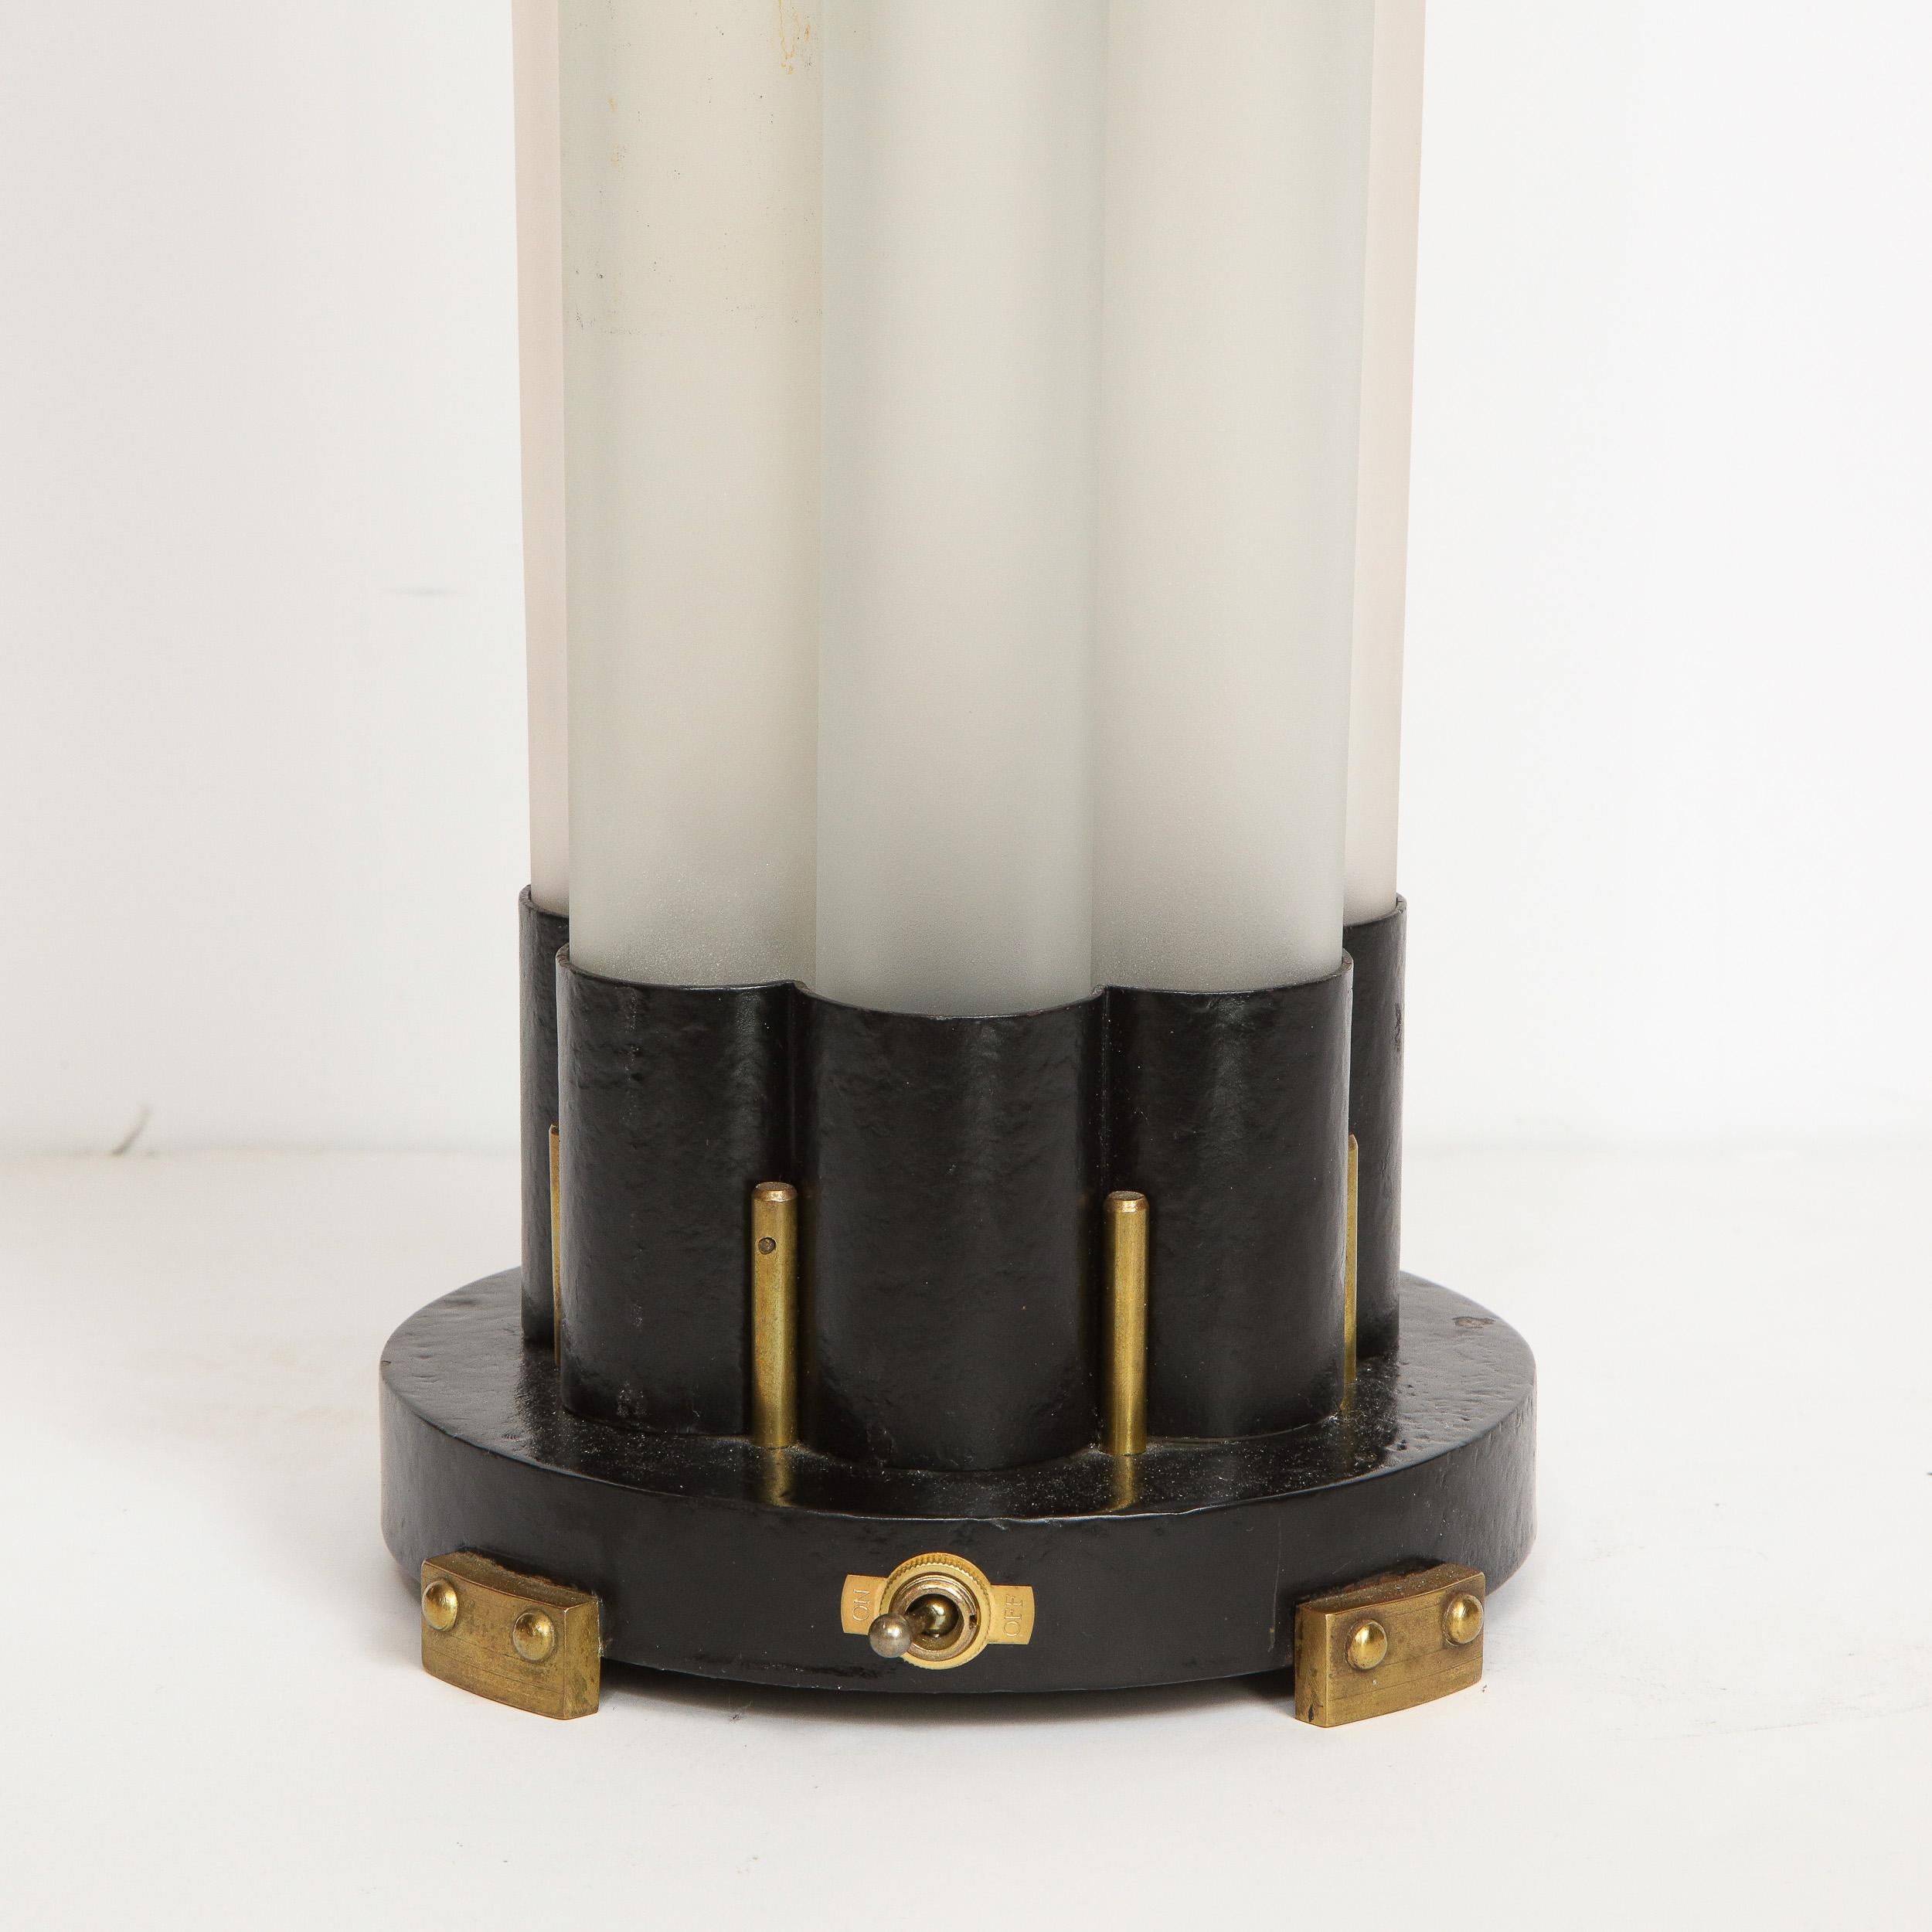 This elegant and graphic Art Deco Machine Age uplight was realized by the celebrated designer Walter Von Nessen circa 1935. It Features a circular black enamel base from which streamlined fittings in the same material ascend. These fittings hold a